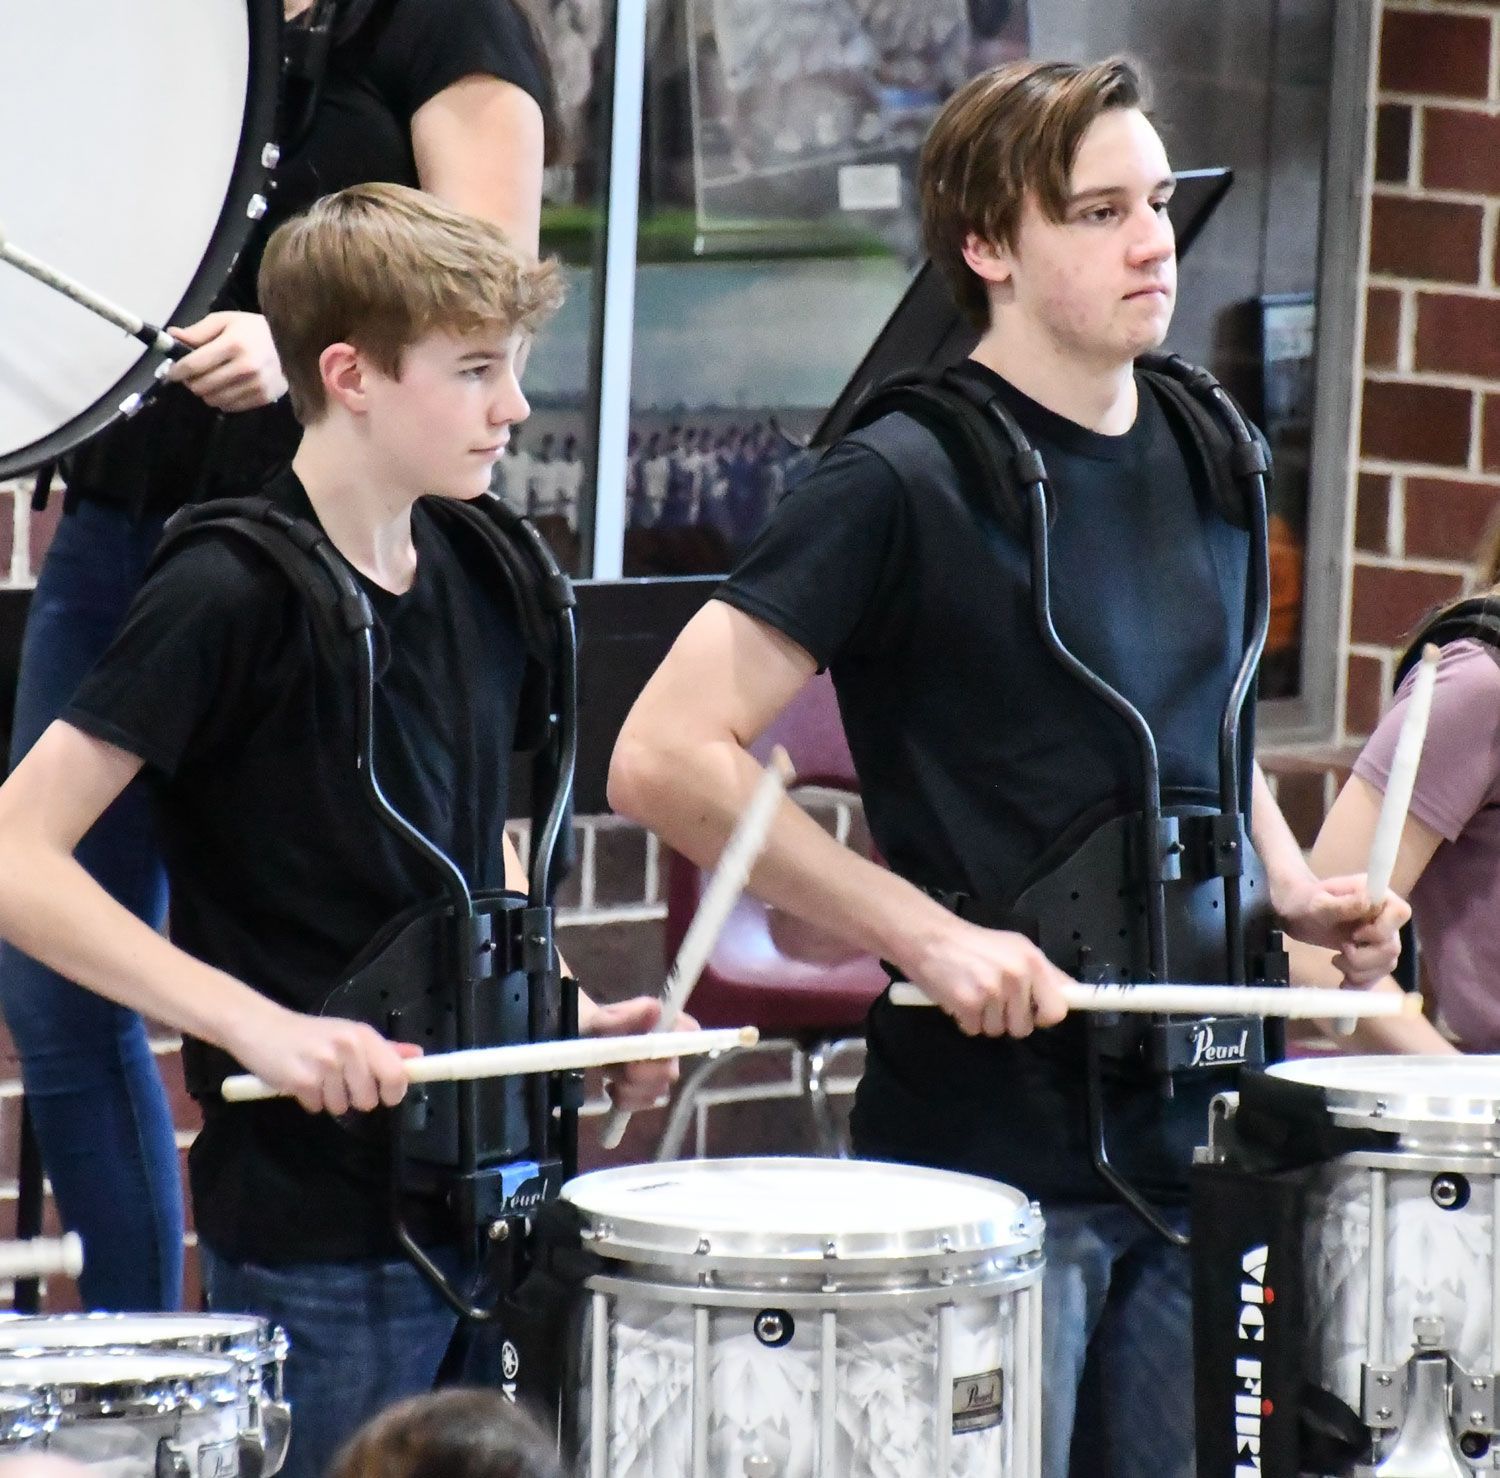 Drum line performing in Commons during Musicfest